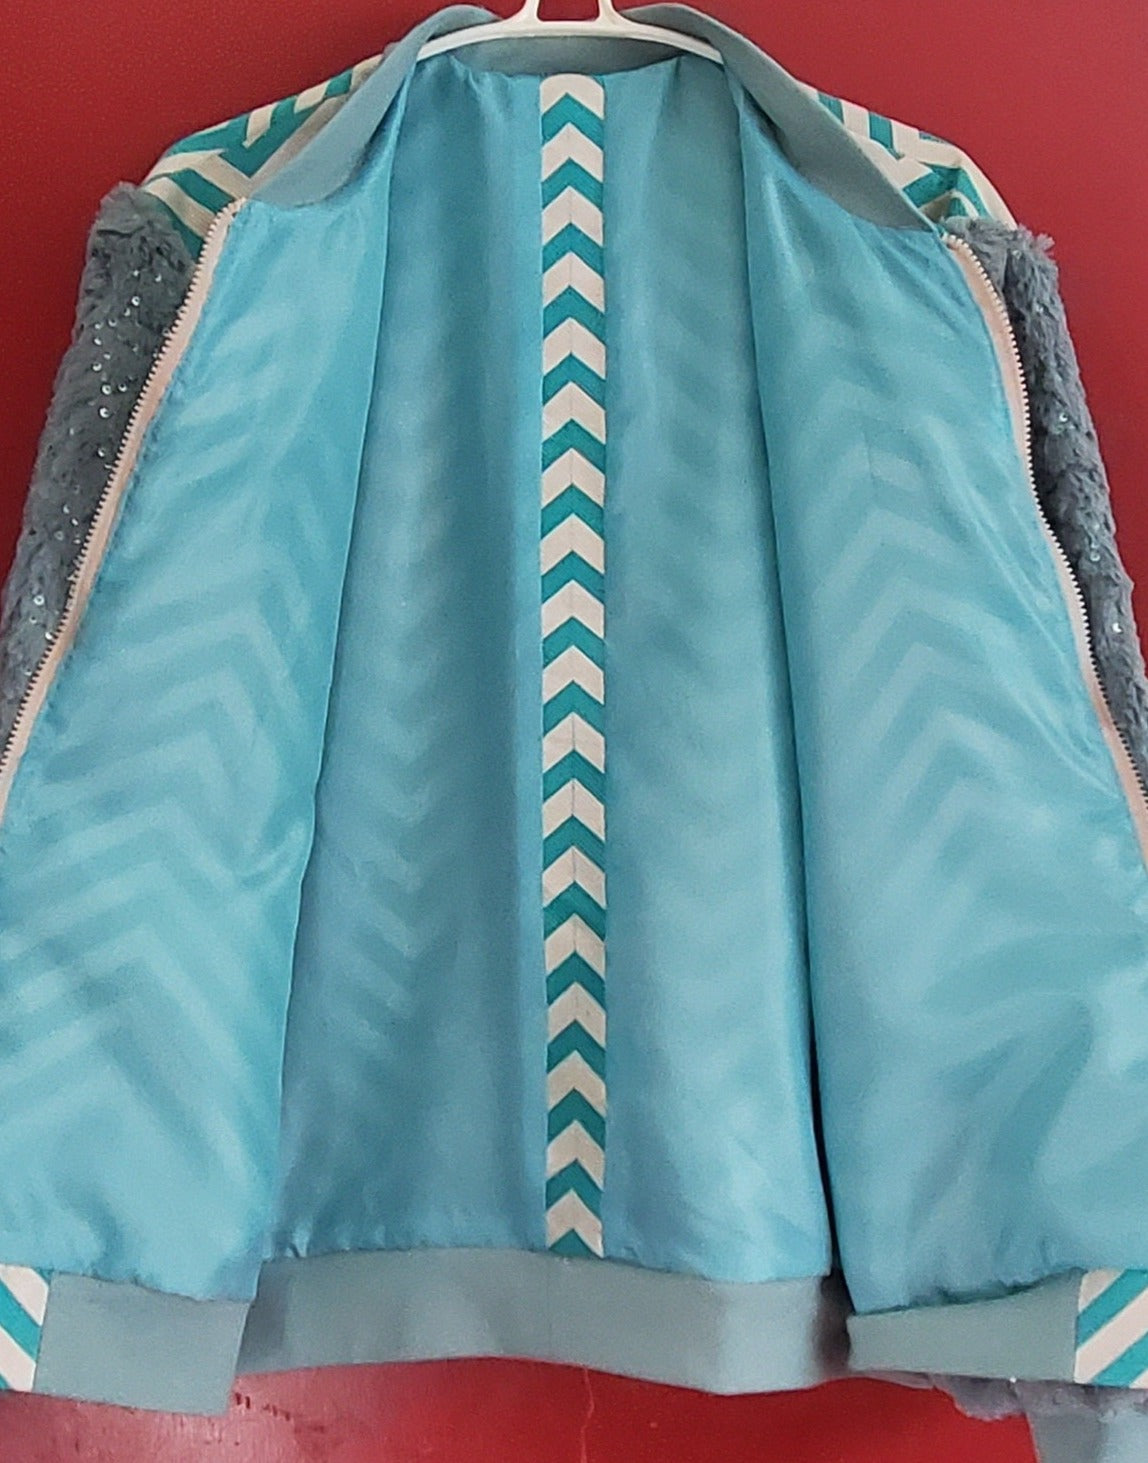 Lining view of Turquoise chevron print bomber jacket with sequined fur sleeves